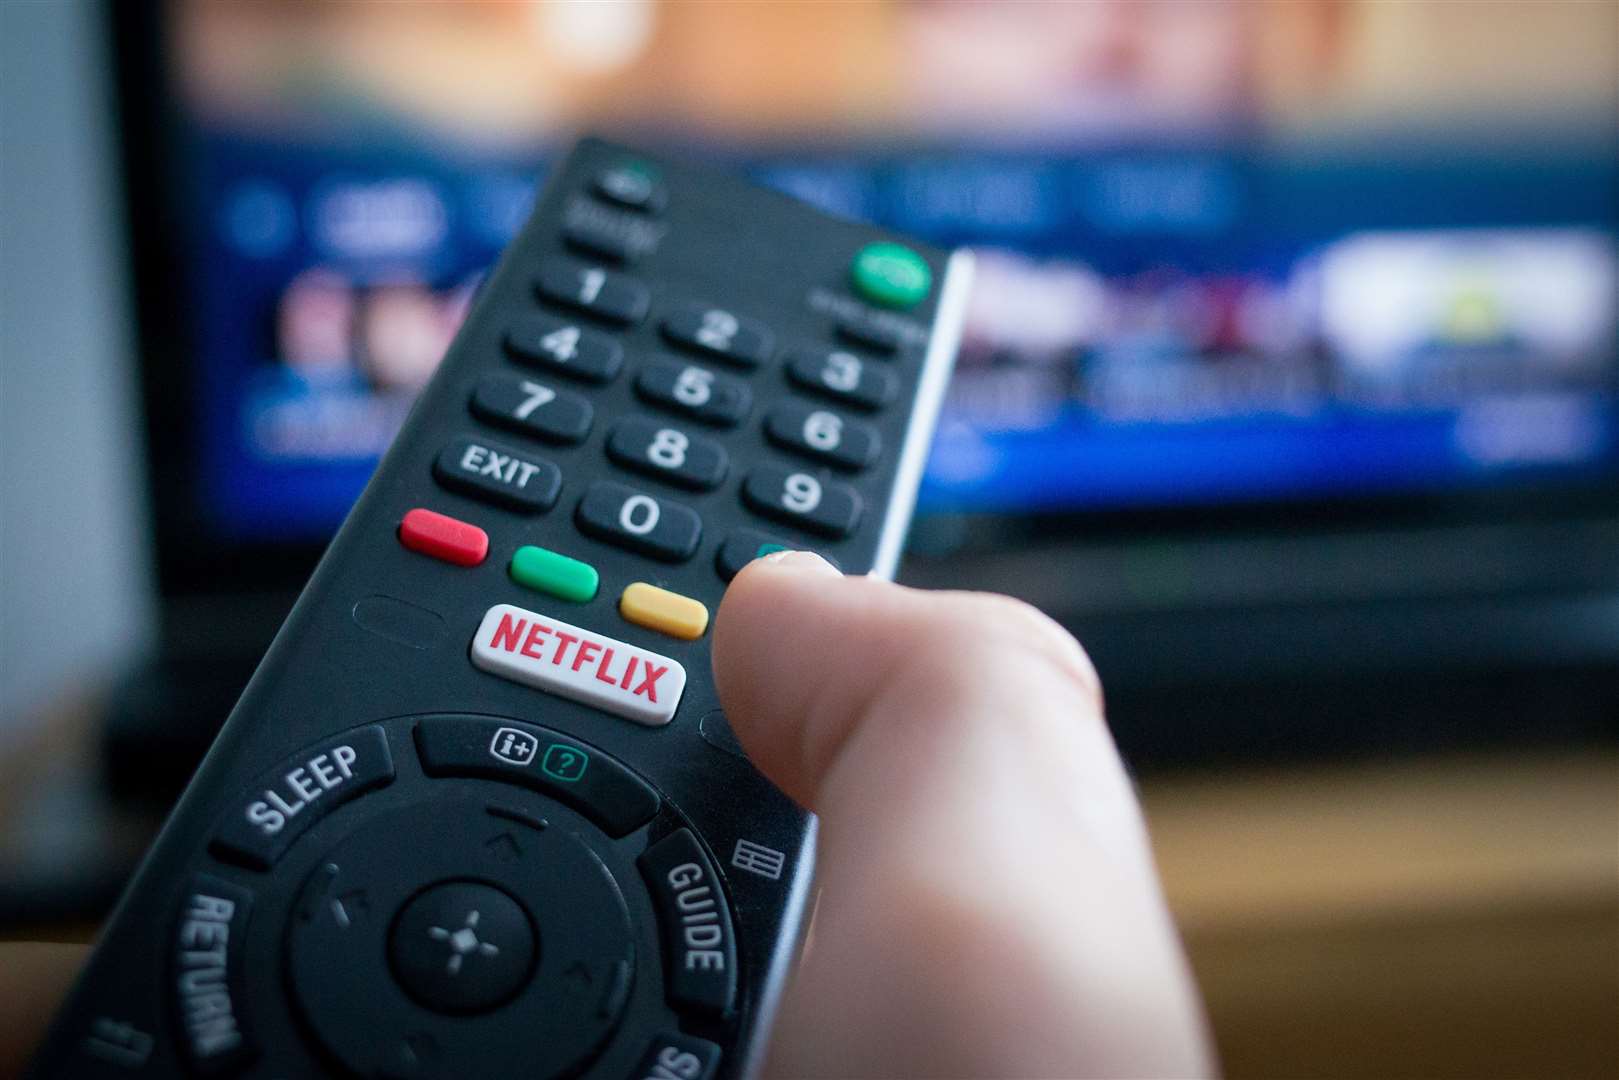 You don’t need a licence to watch streaming services like Netflix. Image: iStock.